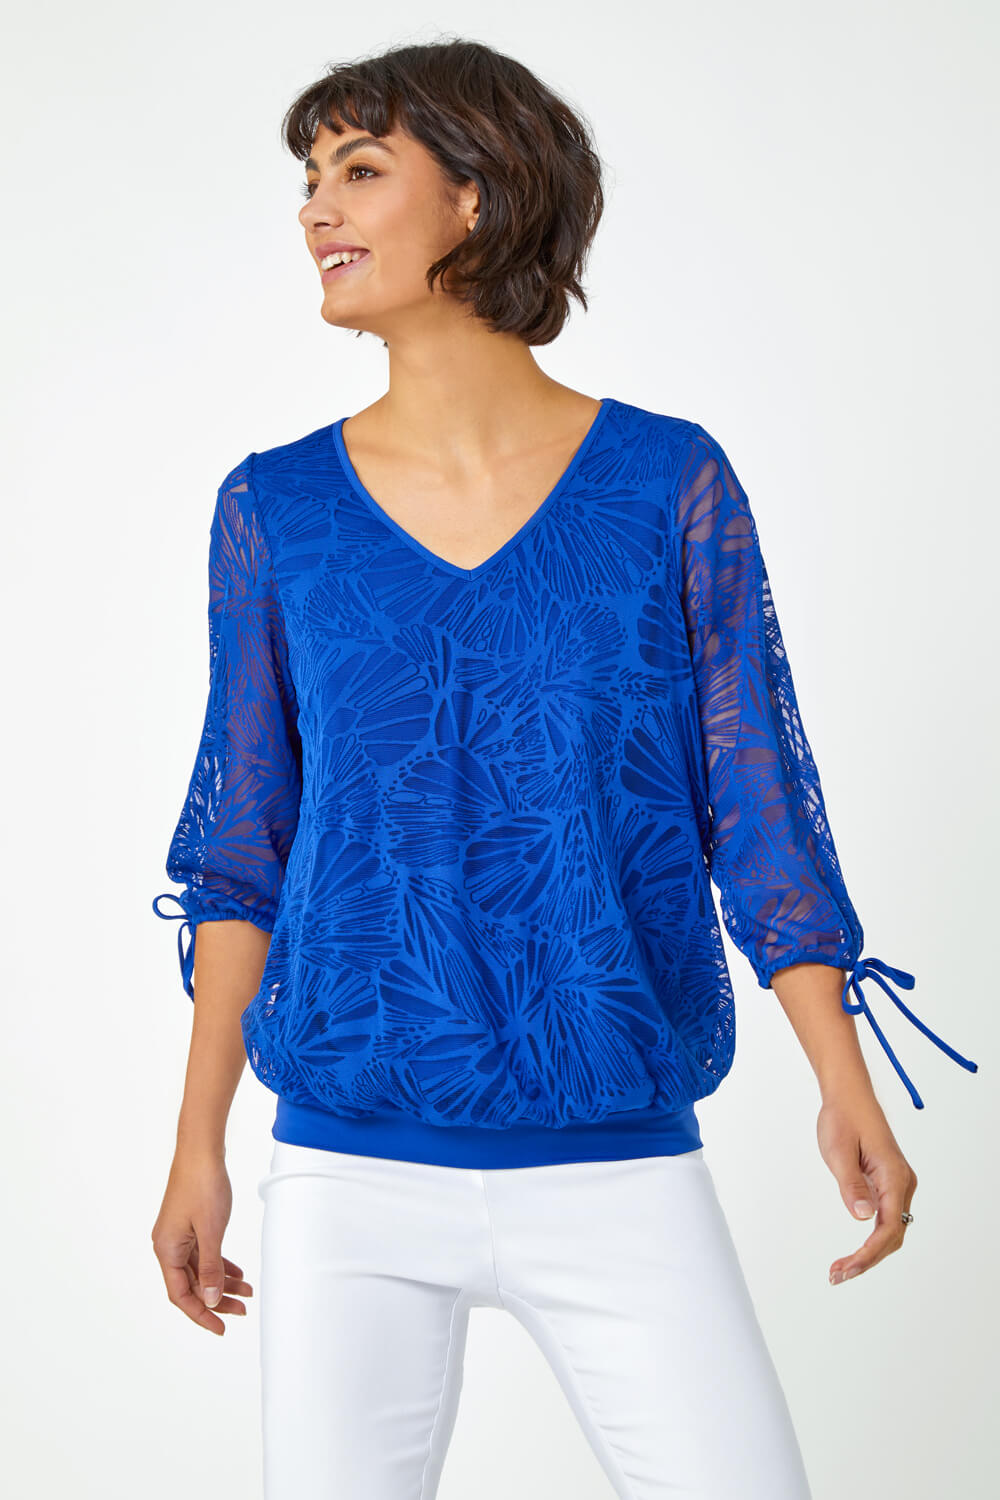 Royal Blue Burnout Tie Sleeve Overlay Top, Image 2 of 5